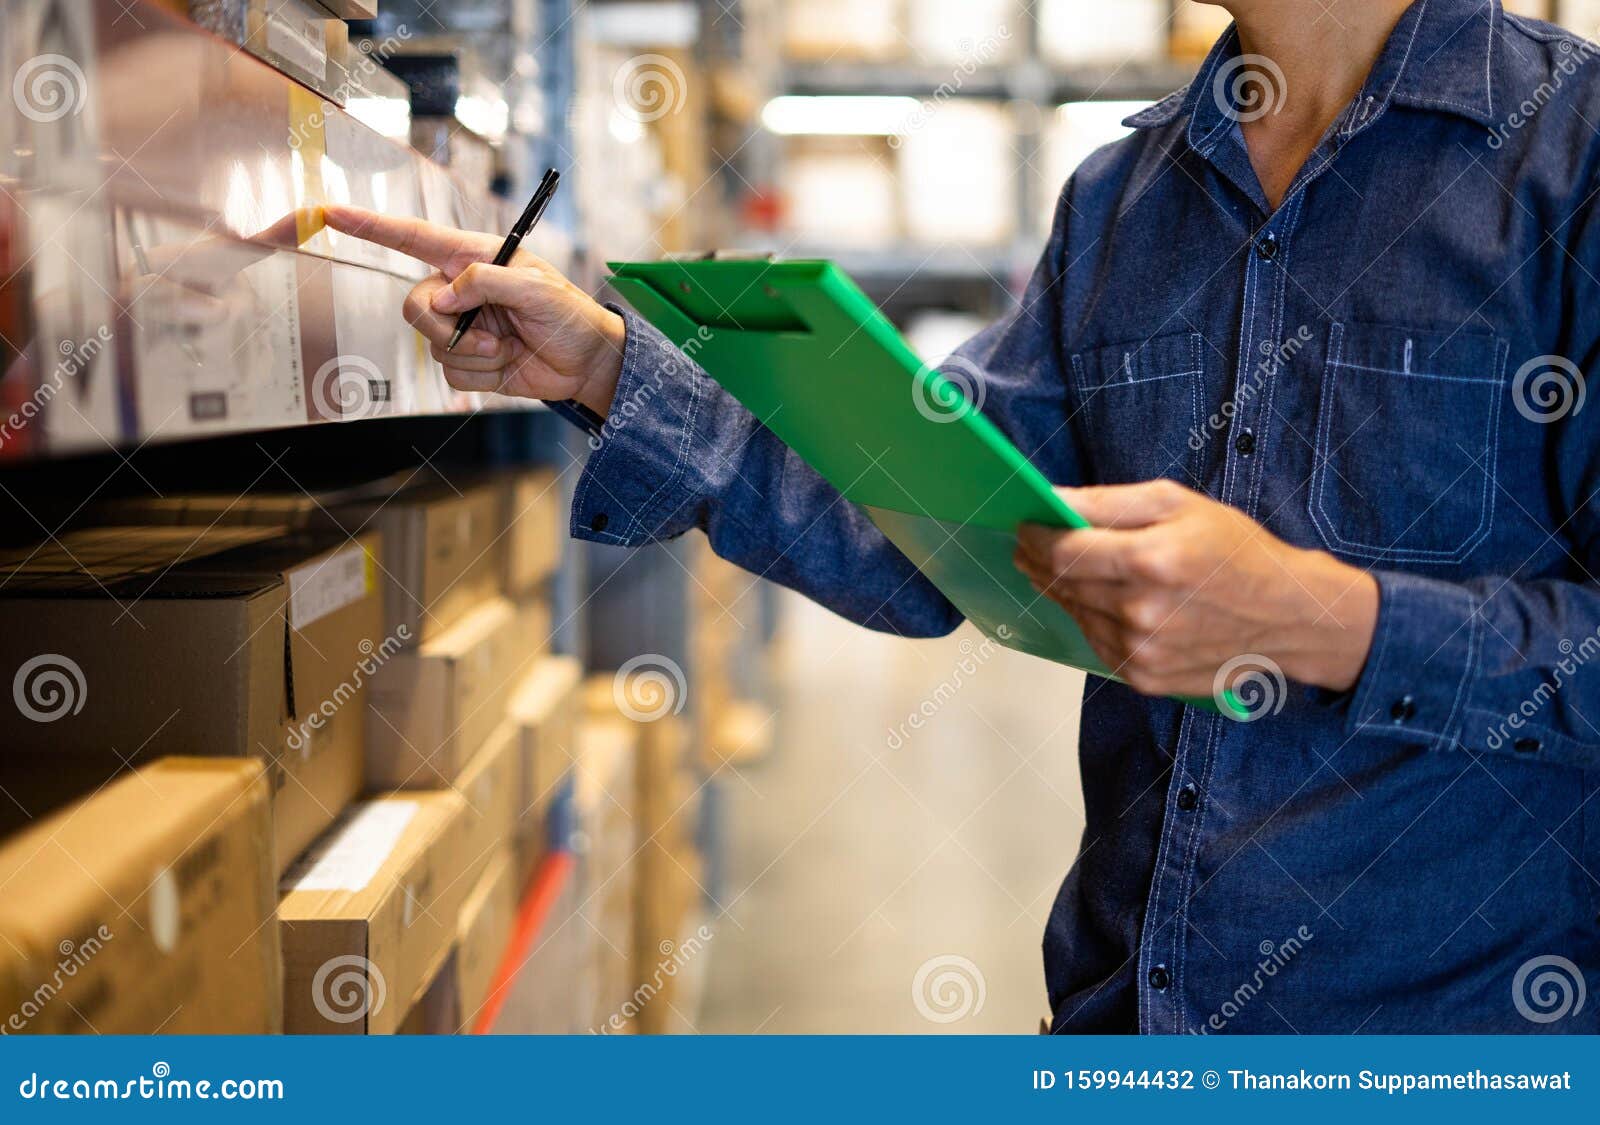 manager man worker doing stocktaking of product management in cardboard box on shelves in warehouse. physical inventory count..